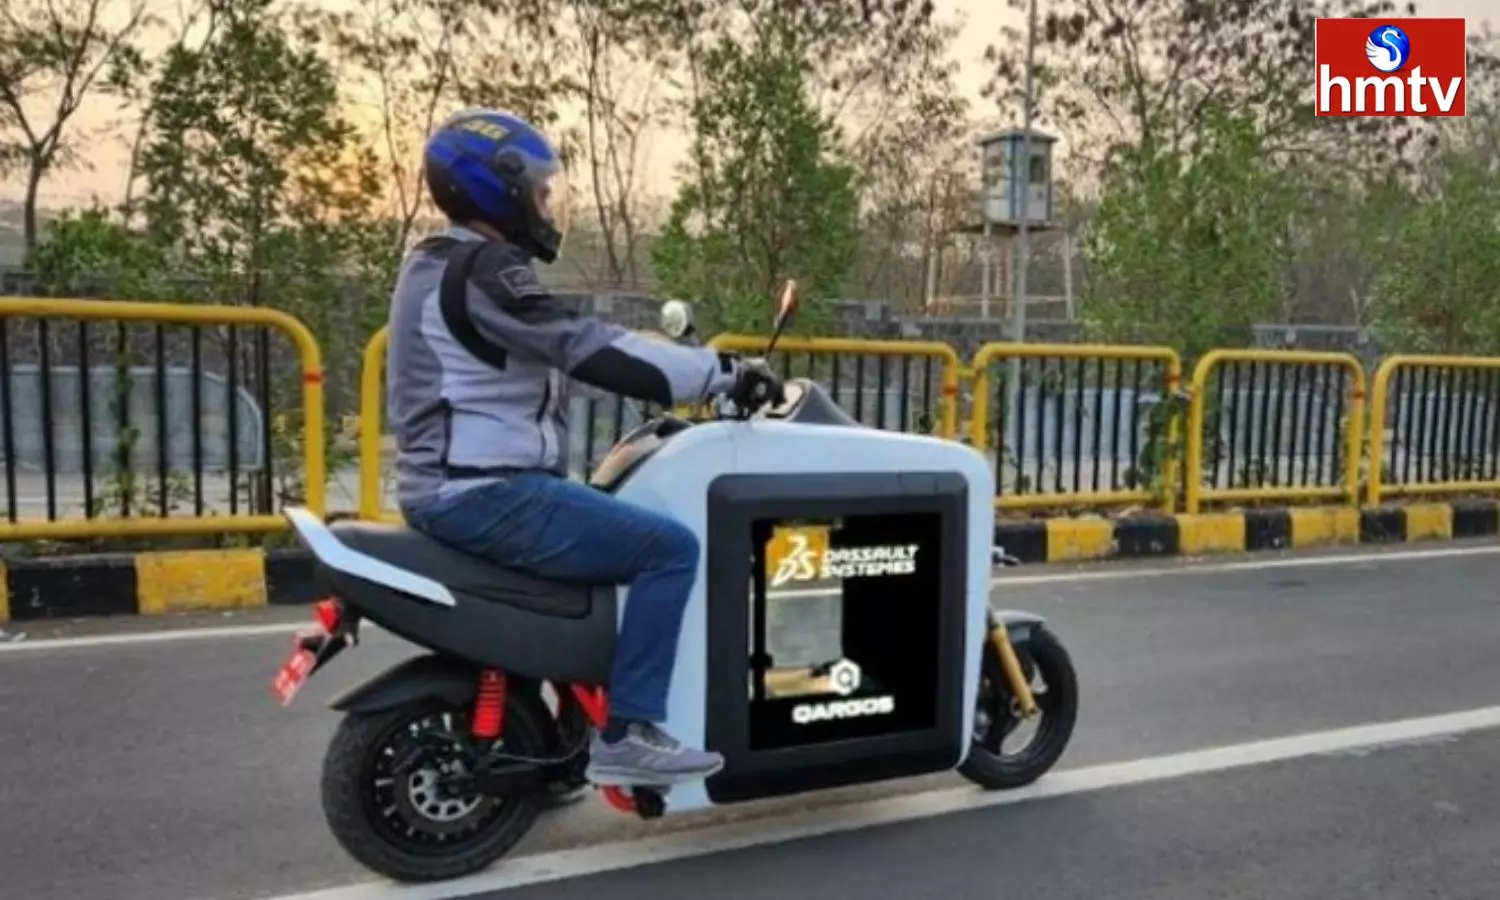 Worlds First Cargo E-Scooter Cargo F9 Spotted During Testing 150km Mileage With Full Charge